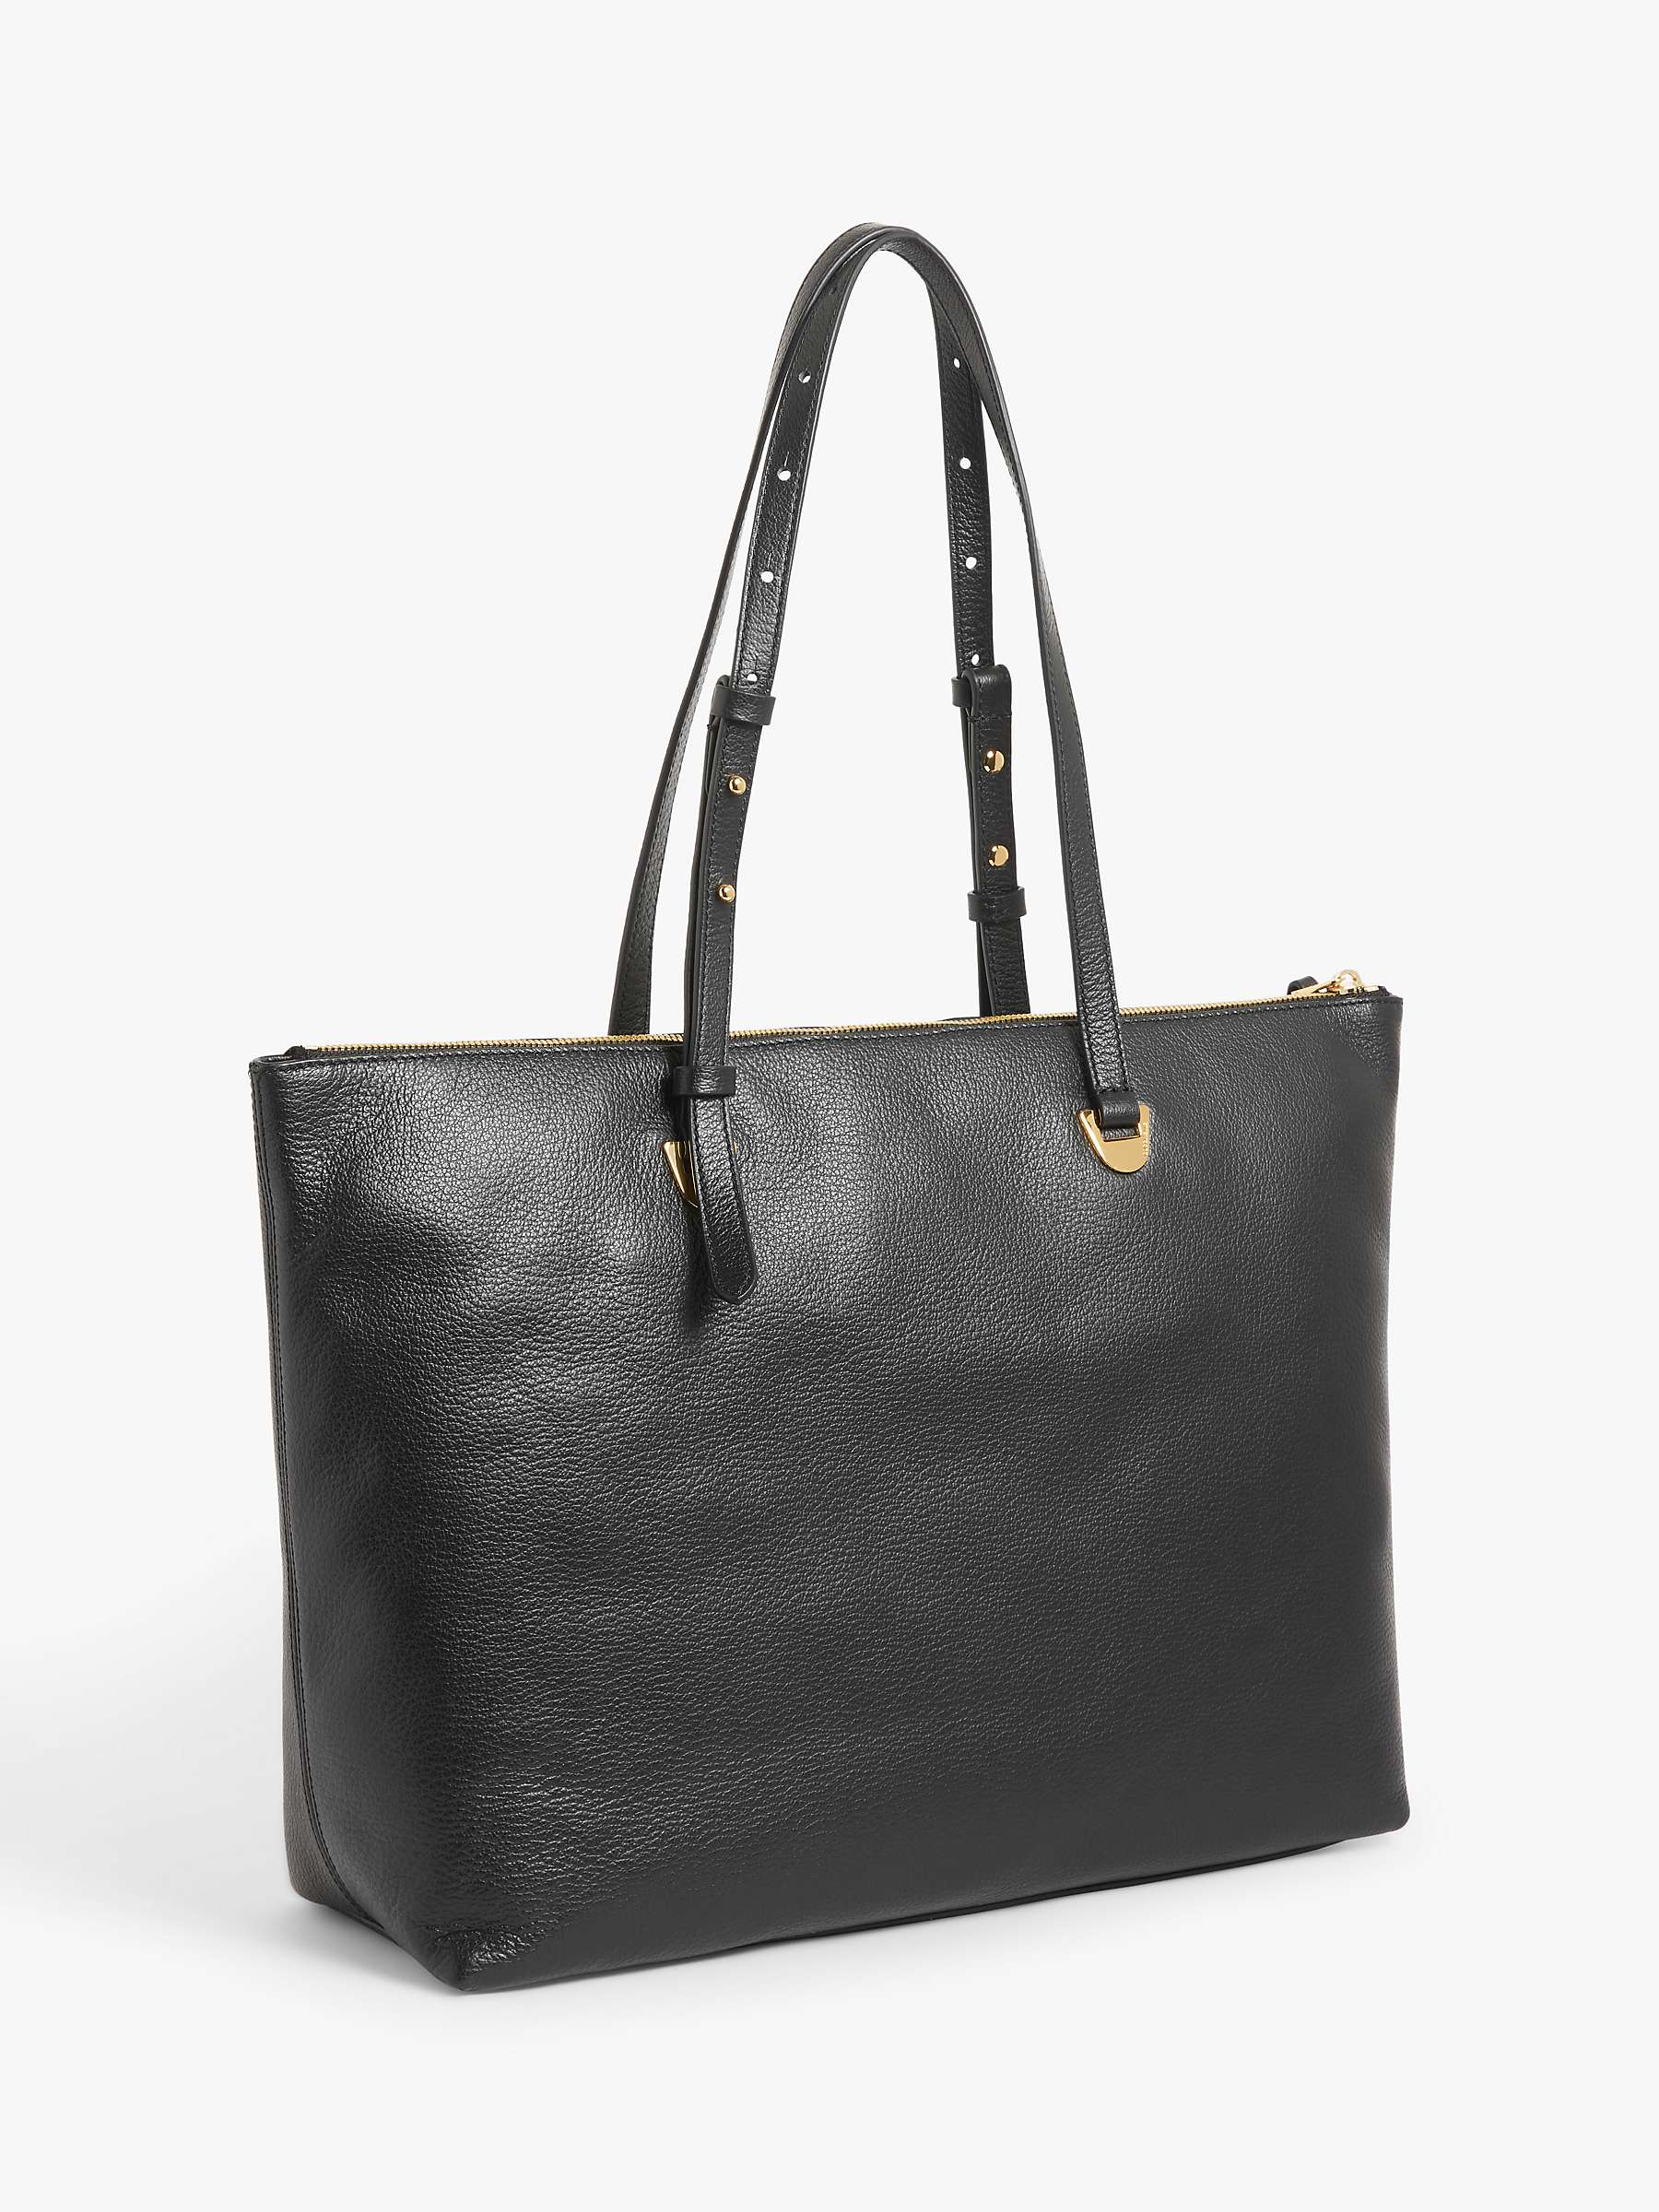 Buy Coccinelle Lea Leather Zip Top Tote Bag Online at johnlewis.com